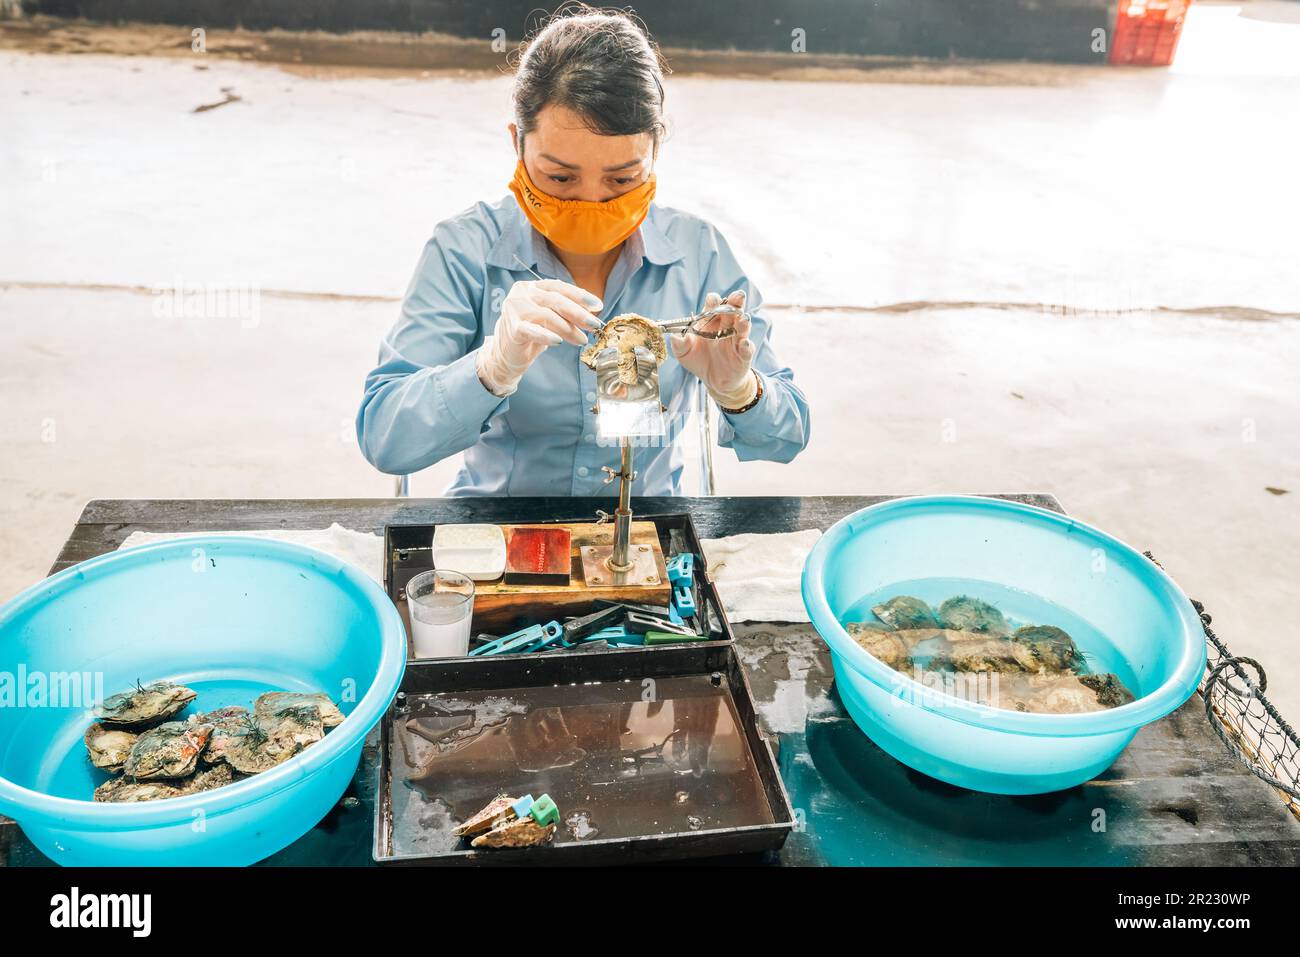 Ha Long City, Vietnam, November 16, 2022: A technician is implanting a bead into a pearl oyster in the process of growing cultured pearl near Ha Long Stock Photo